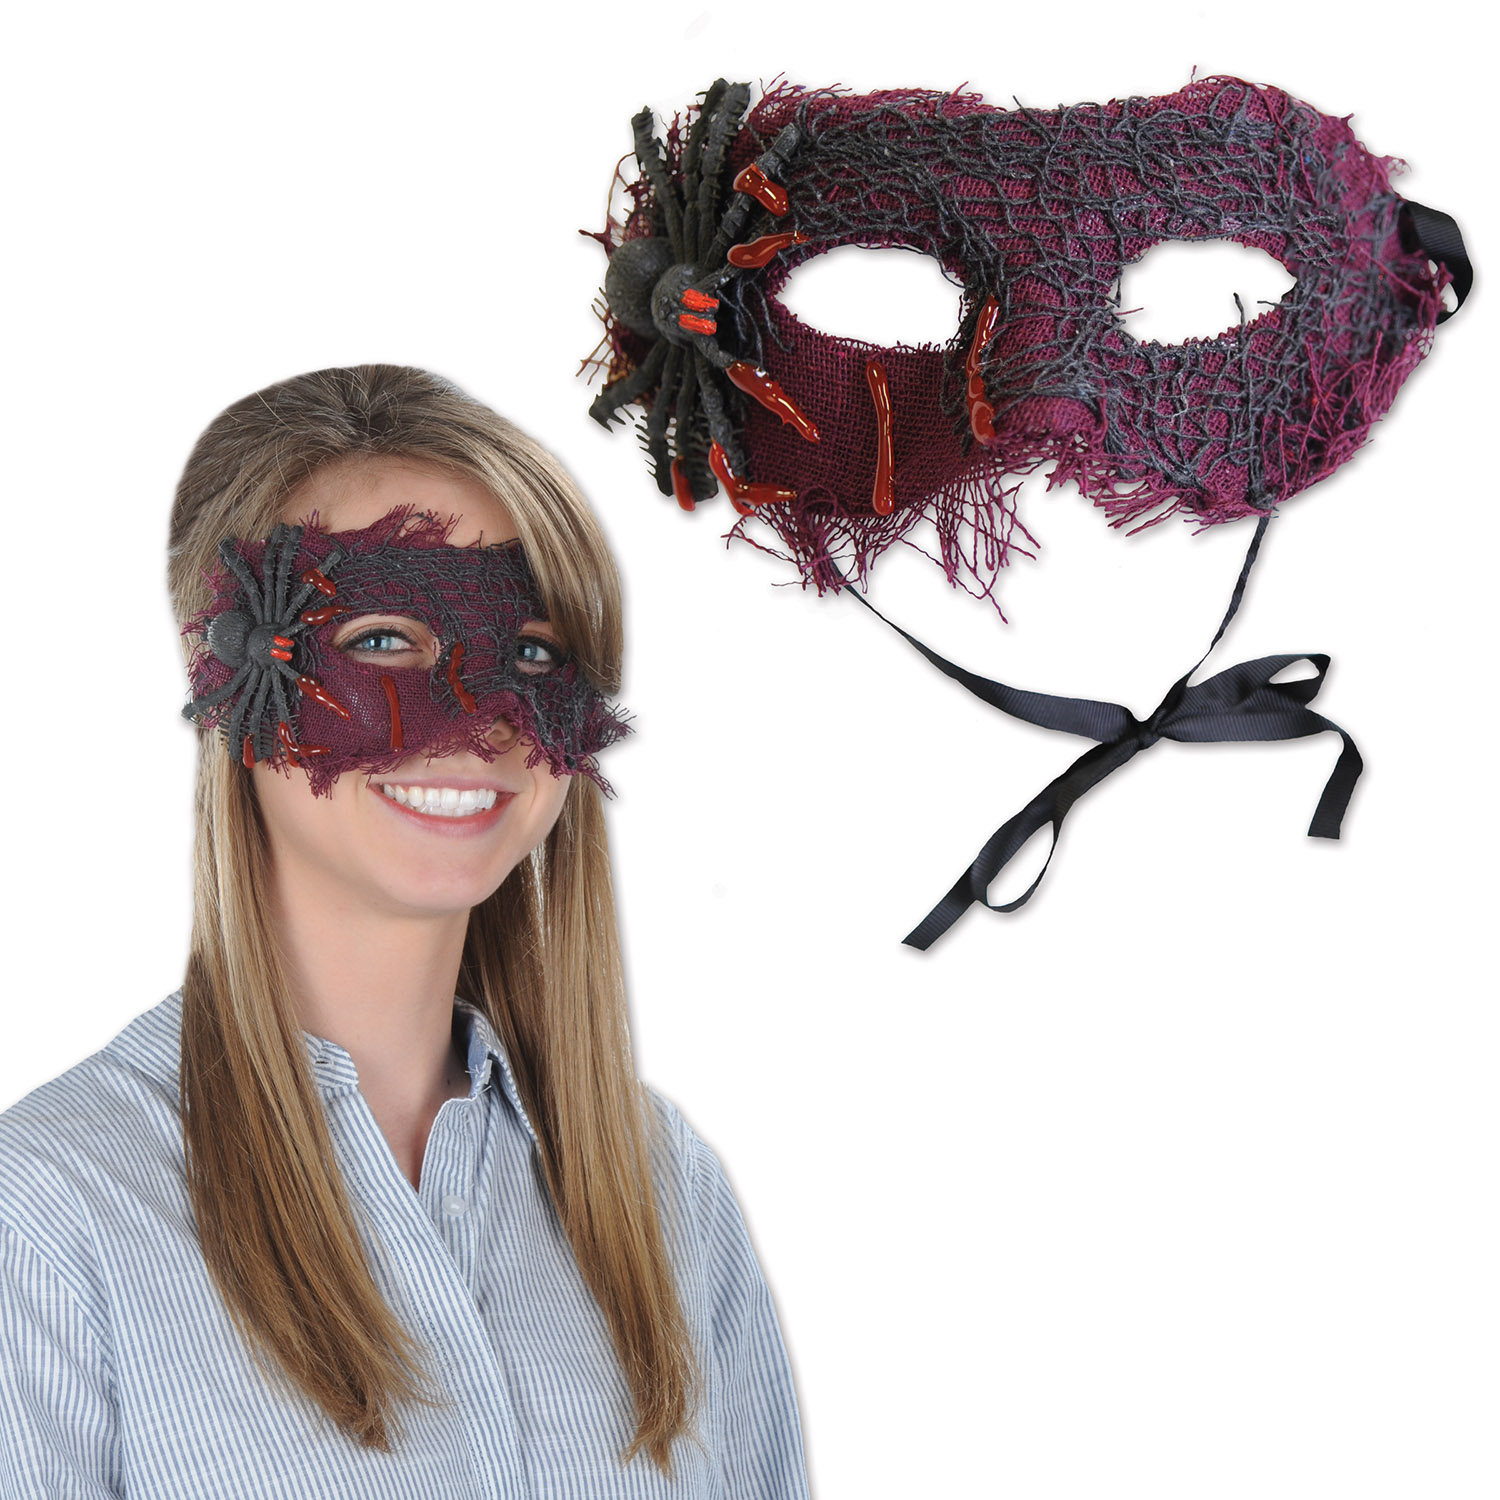 12 Pieces of Spider Mask